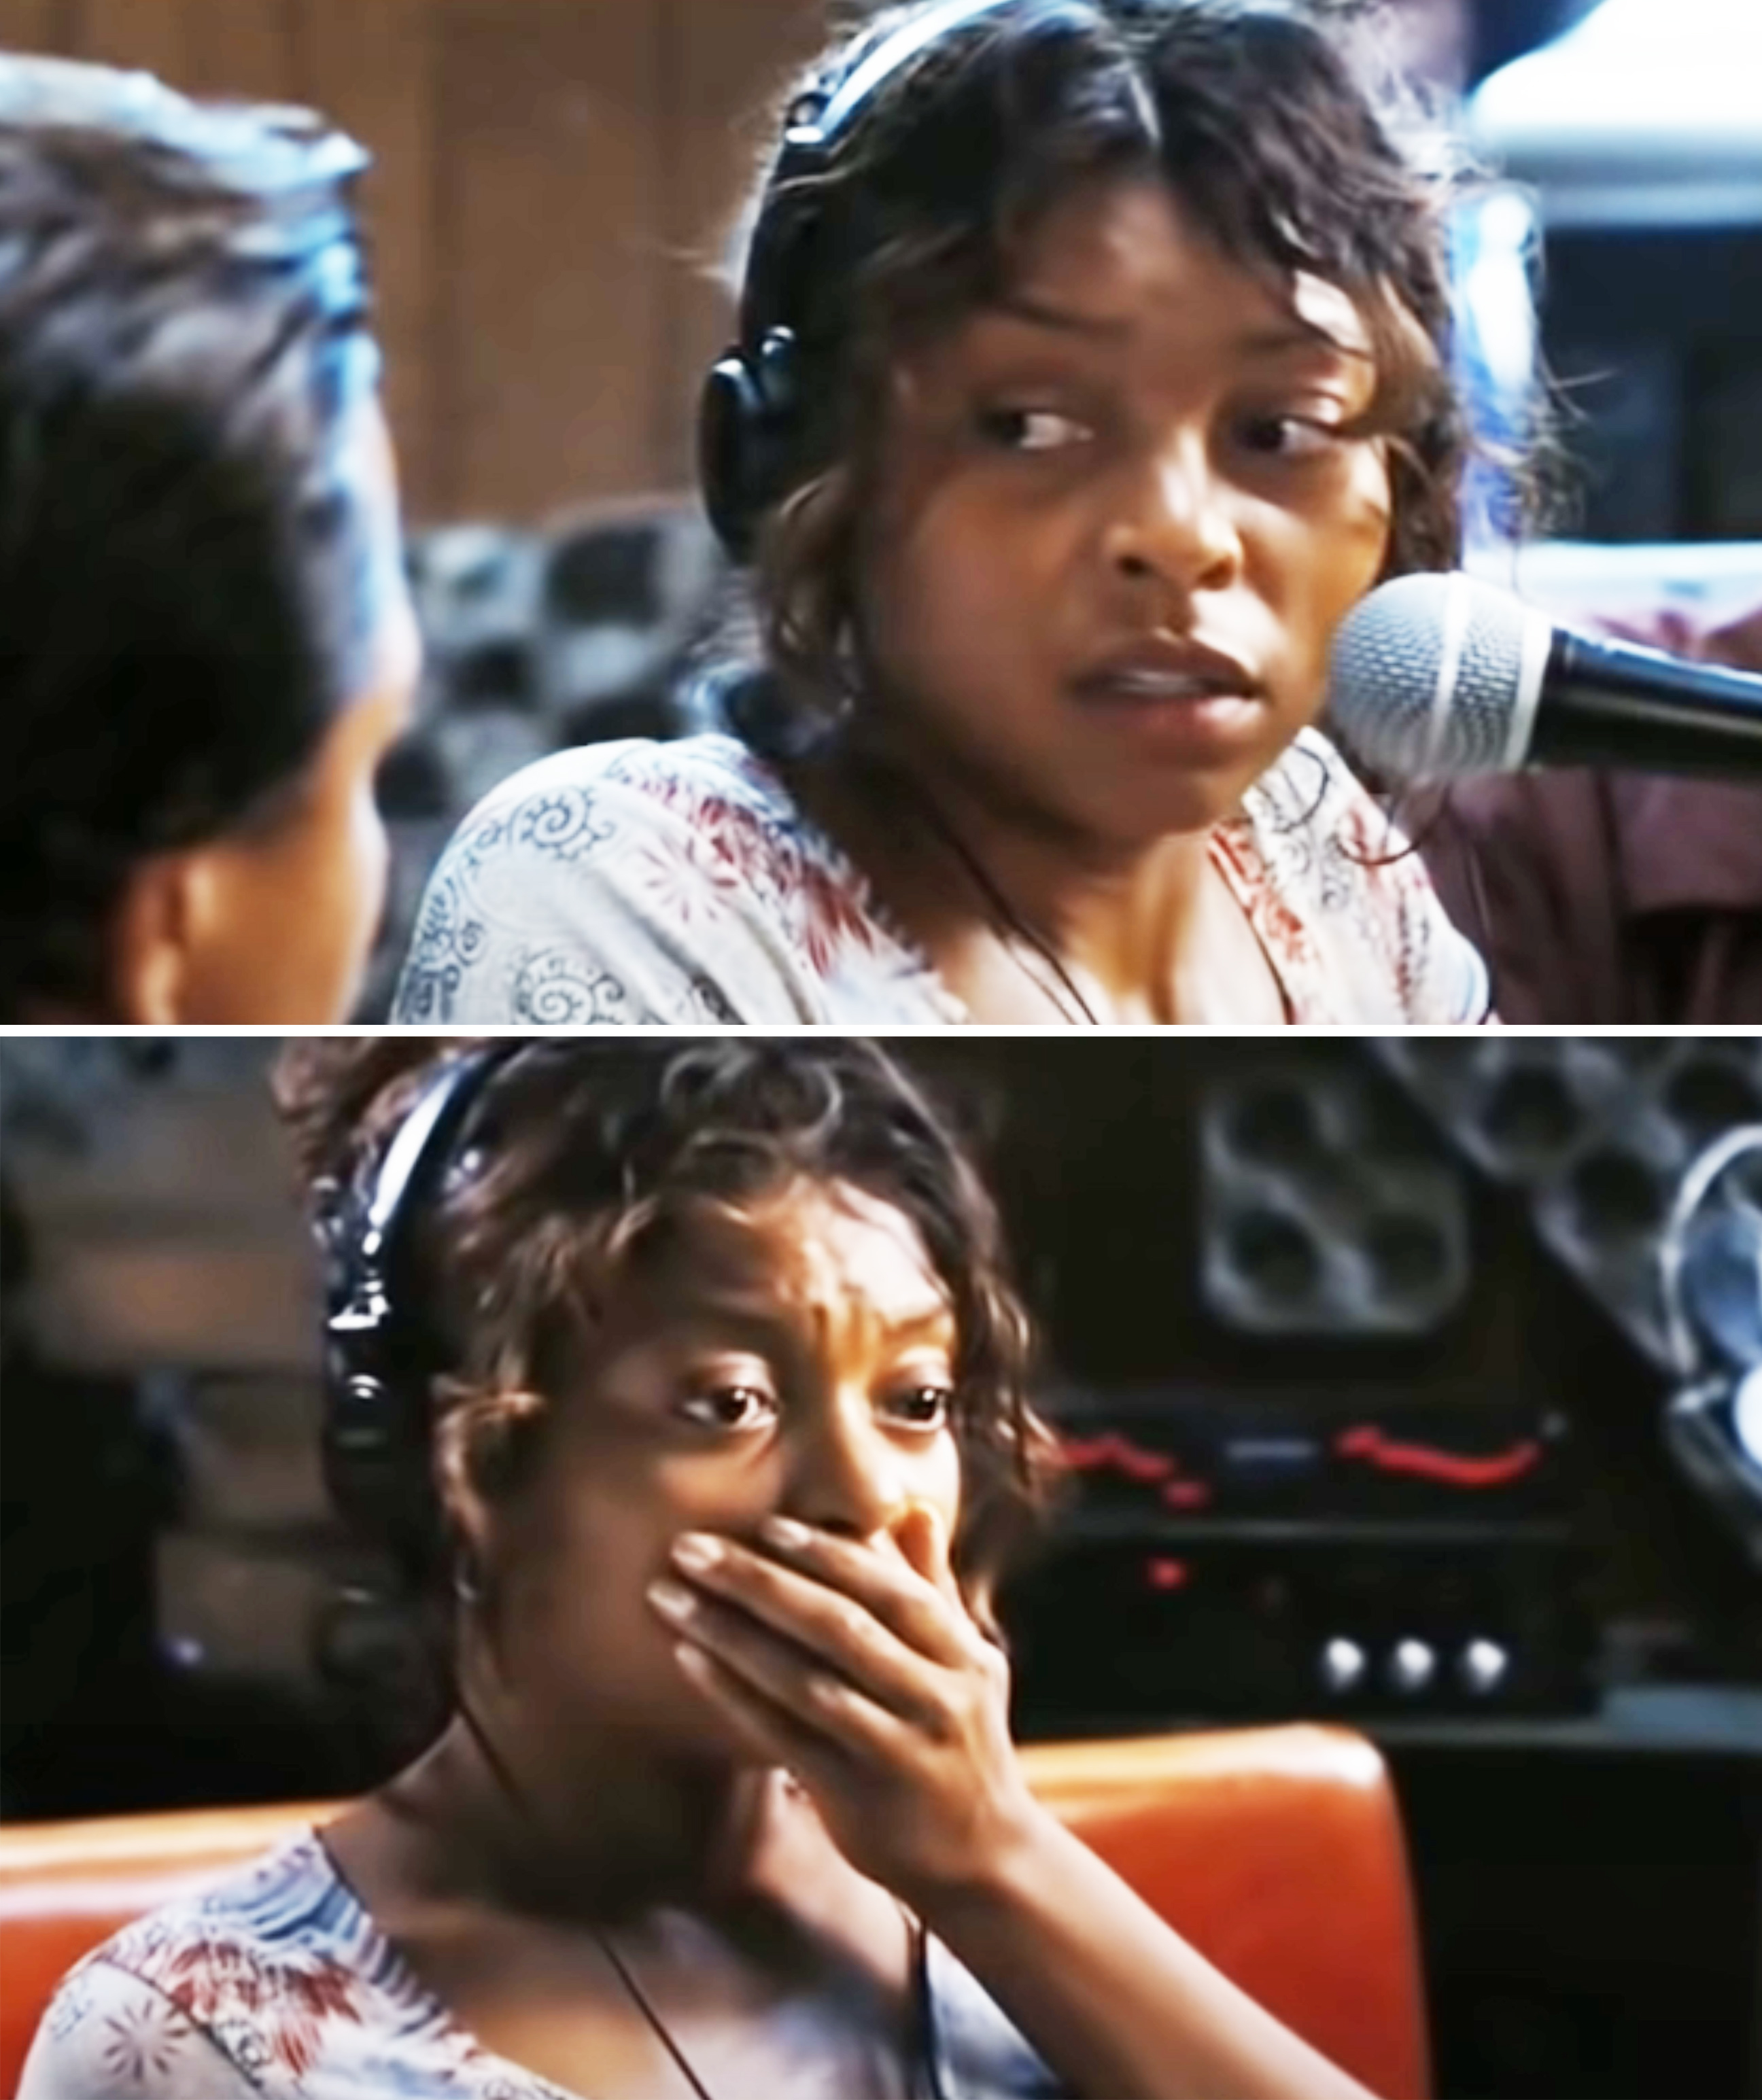 Two scenes from a film showing a female character with headphones speaking into a microphone and reacting with surprise